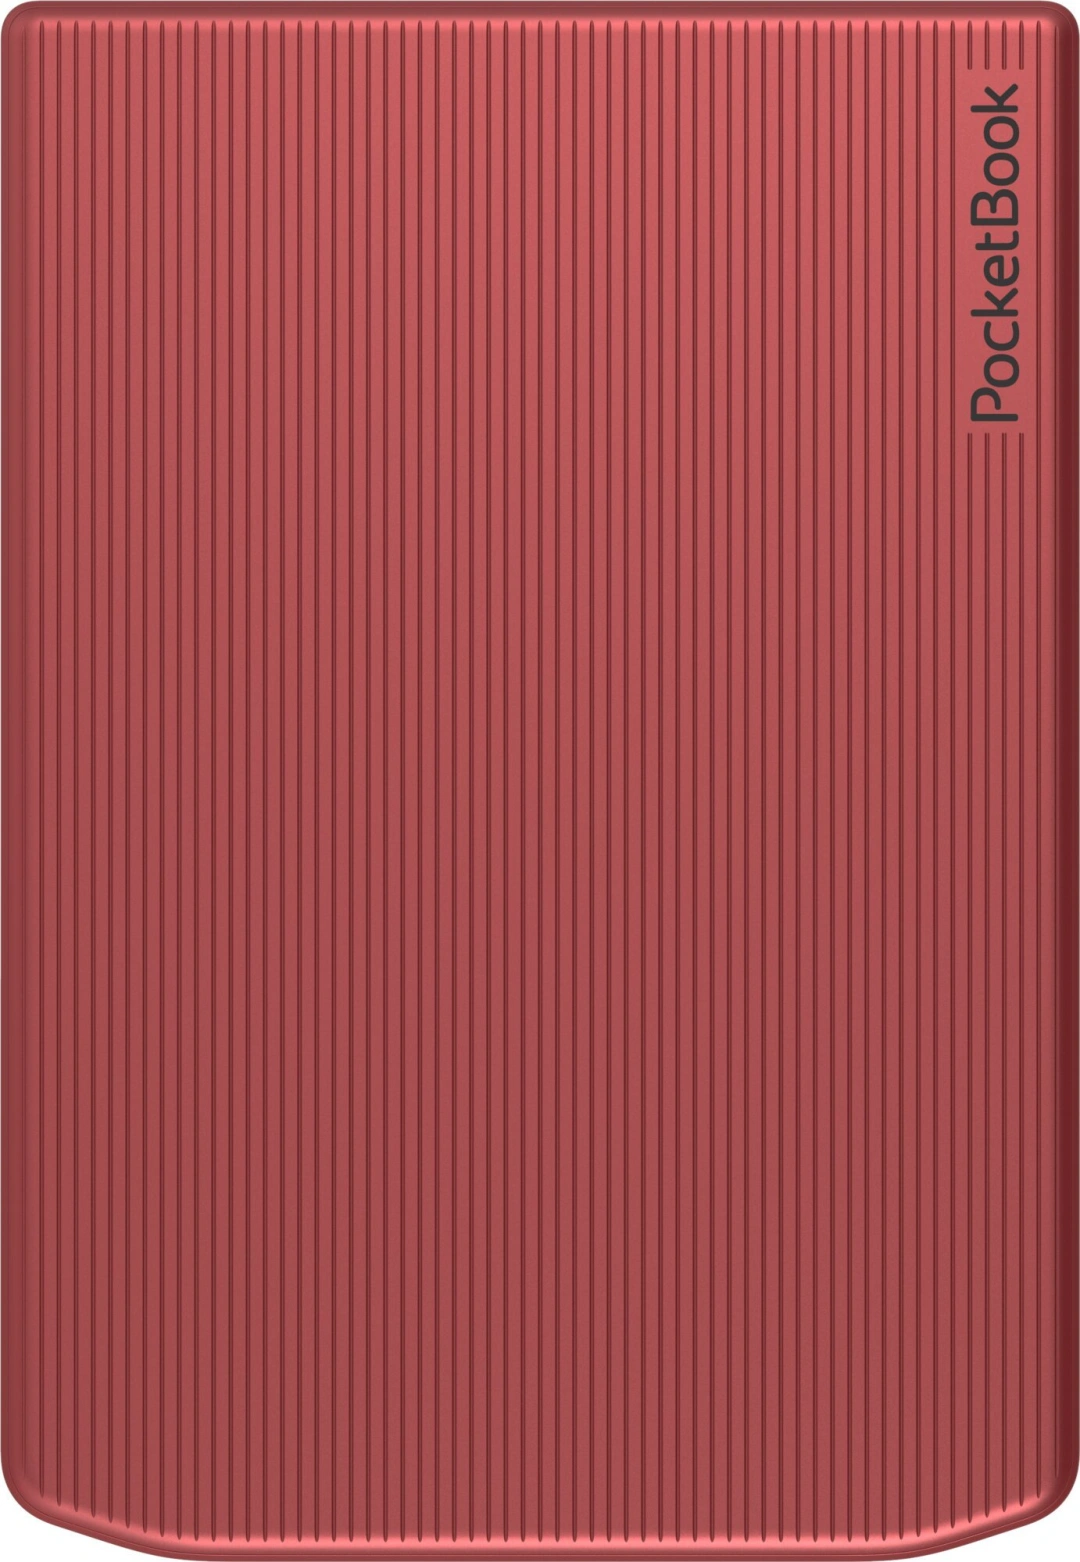 PocketBook 634 Verse PRO, Passion Red